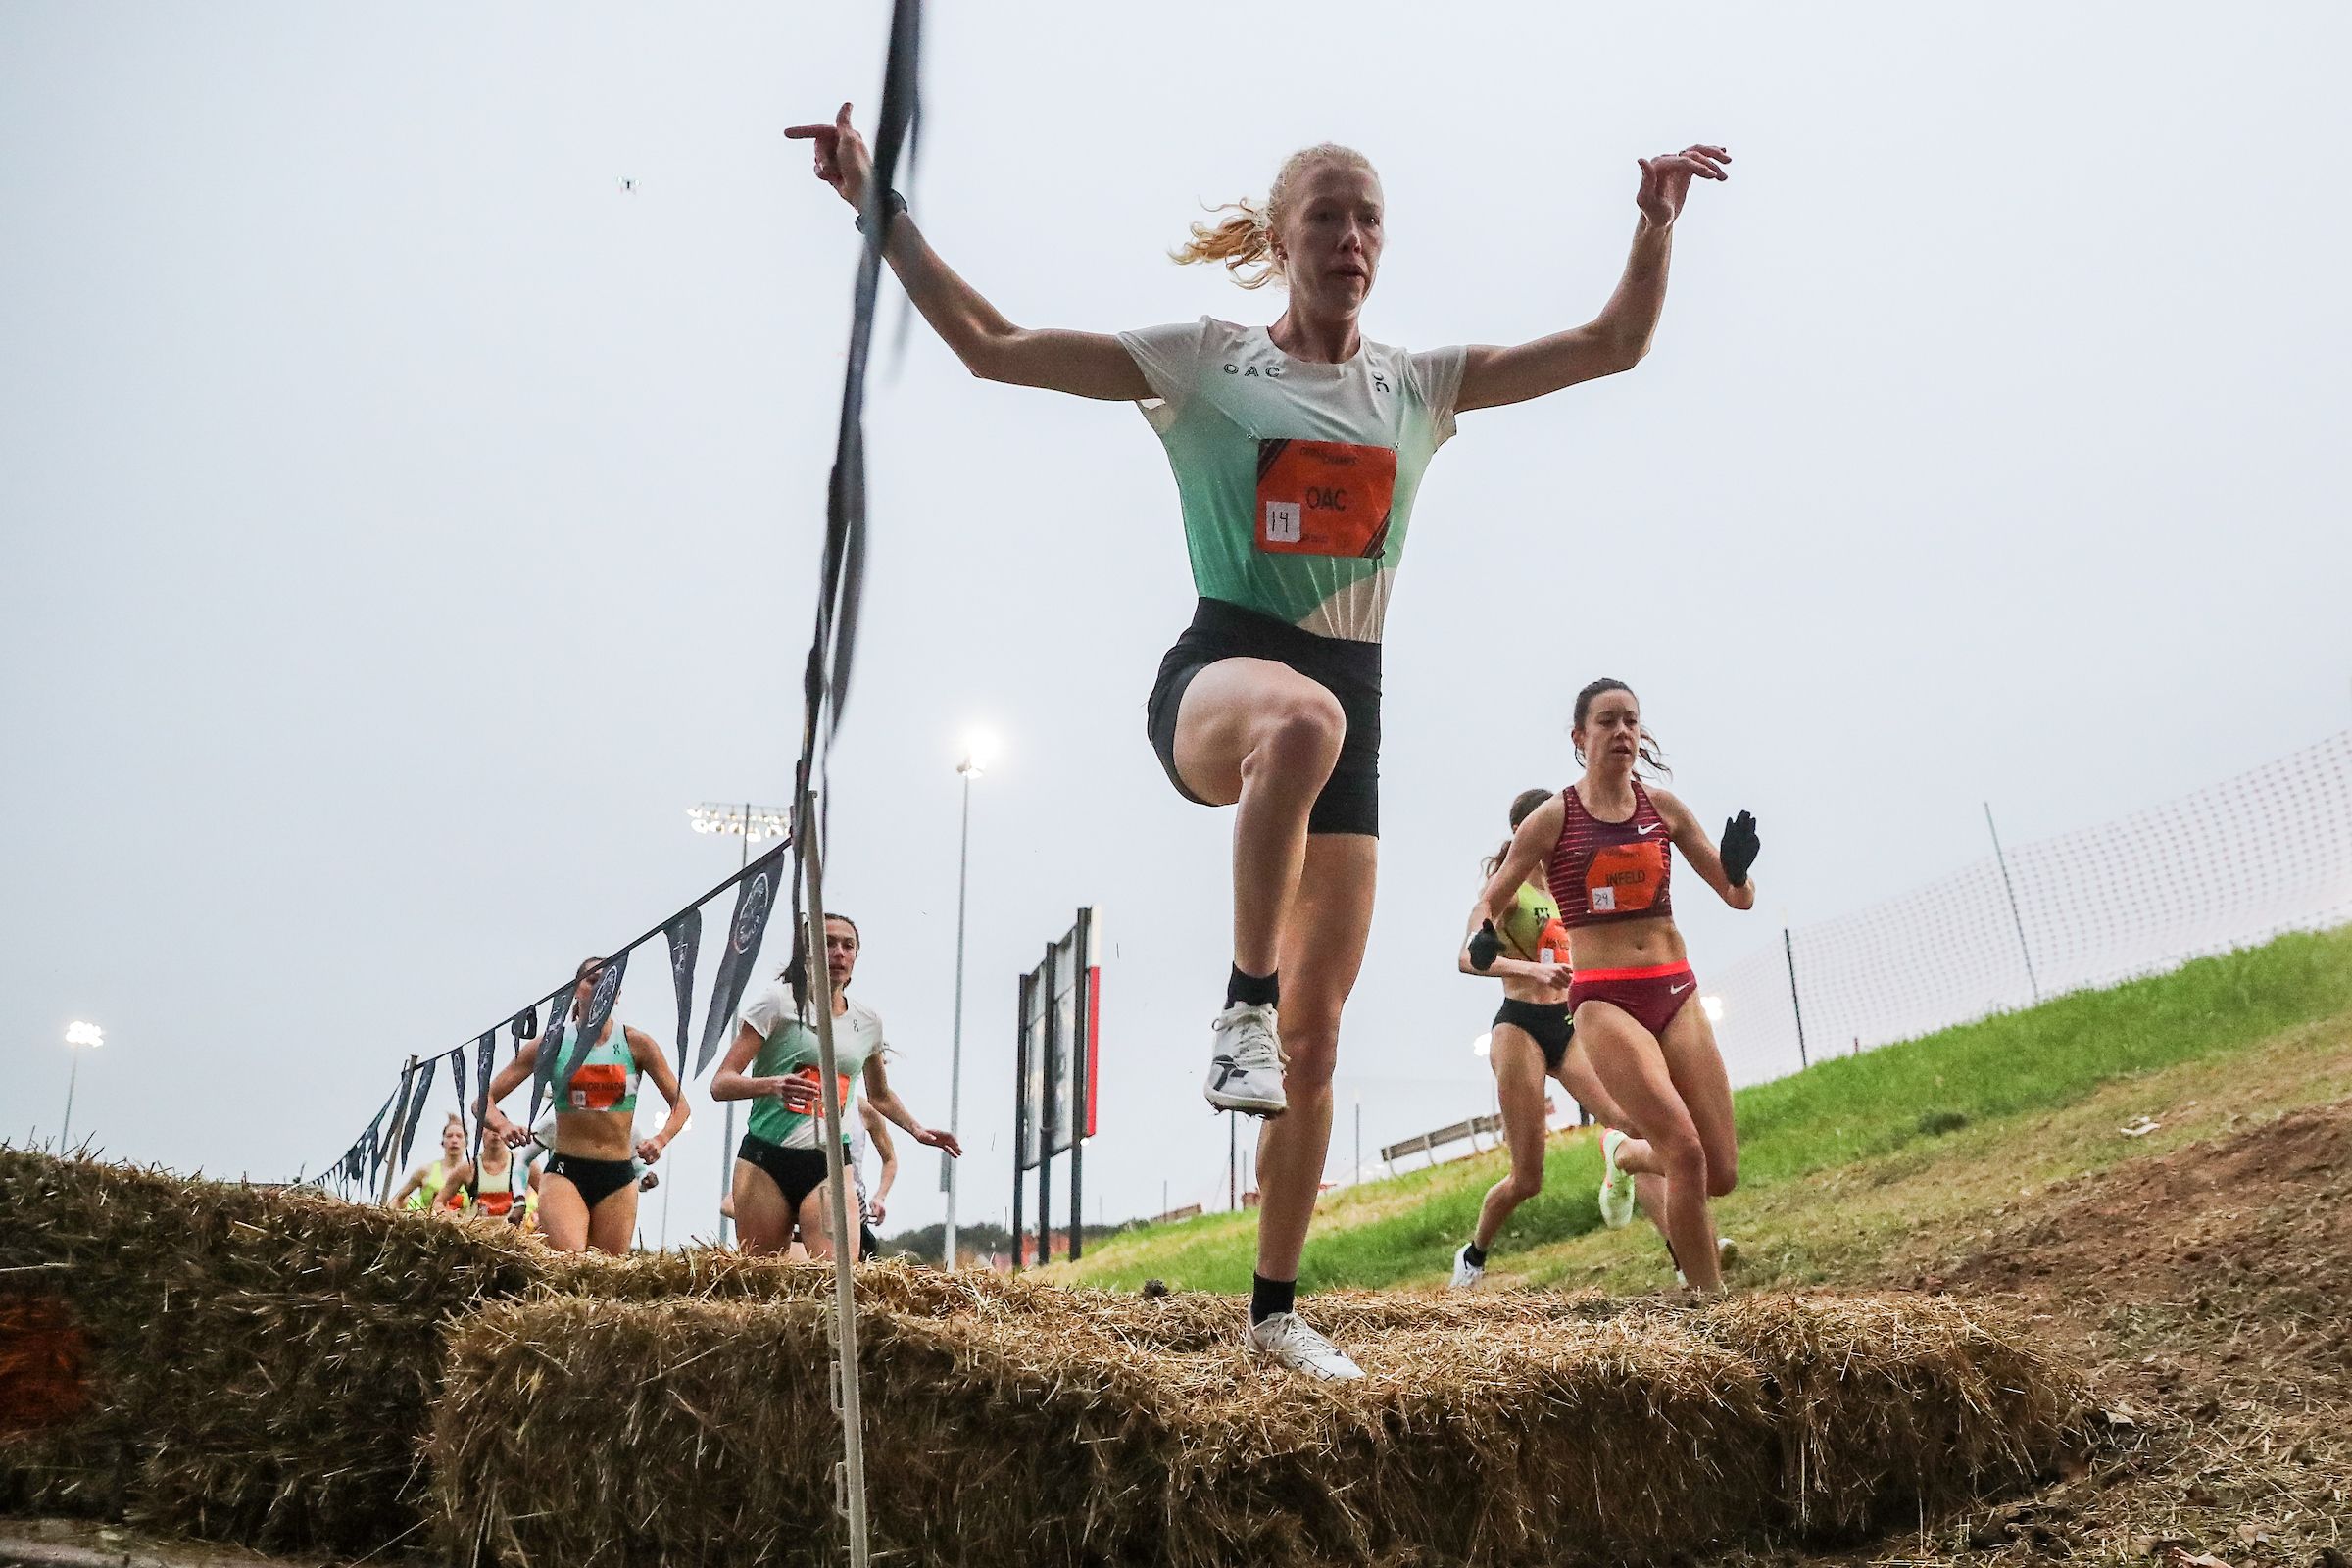 Eventual winner Alicia Monson in action at the Cross Champs in Austin